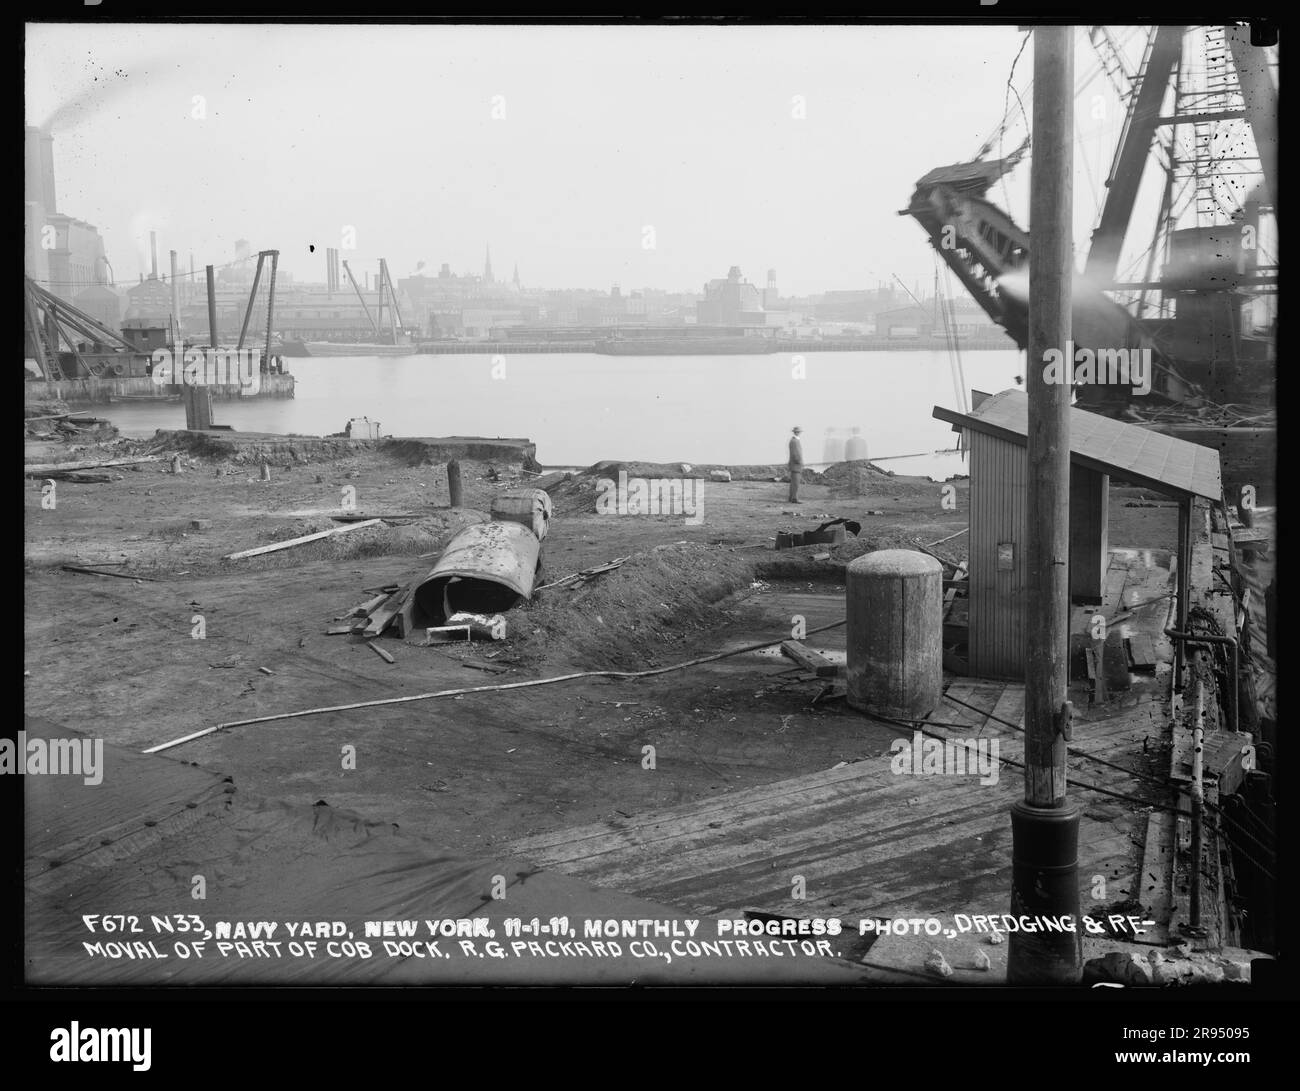 Monthly Progress Photo, Dredging and Removal of Part of Cob Dock, R. G. Packard Company, Contractor. Glass Plate Negatives of the Construction and Repair of Buildings, Facilities, and Vessels at the New York Navy Yard. Stock Photo